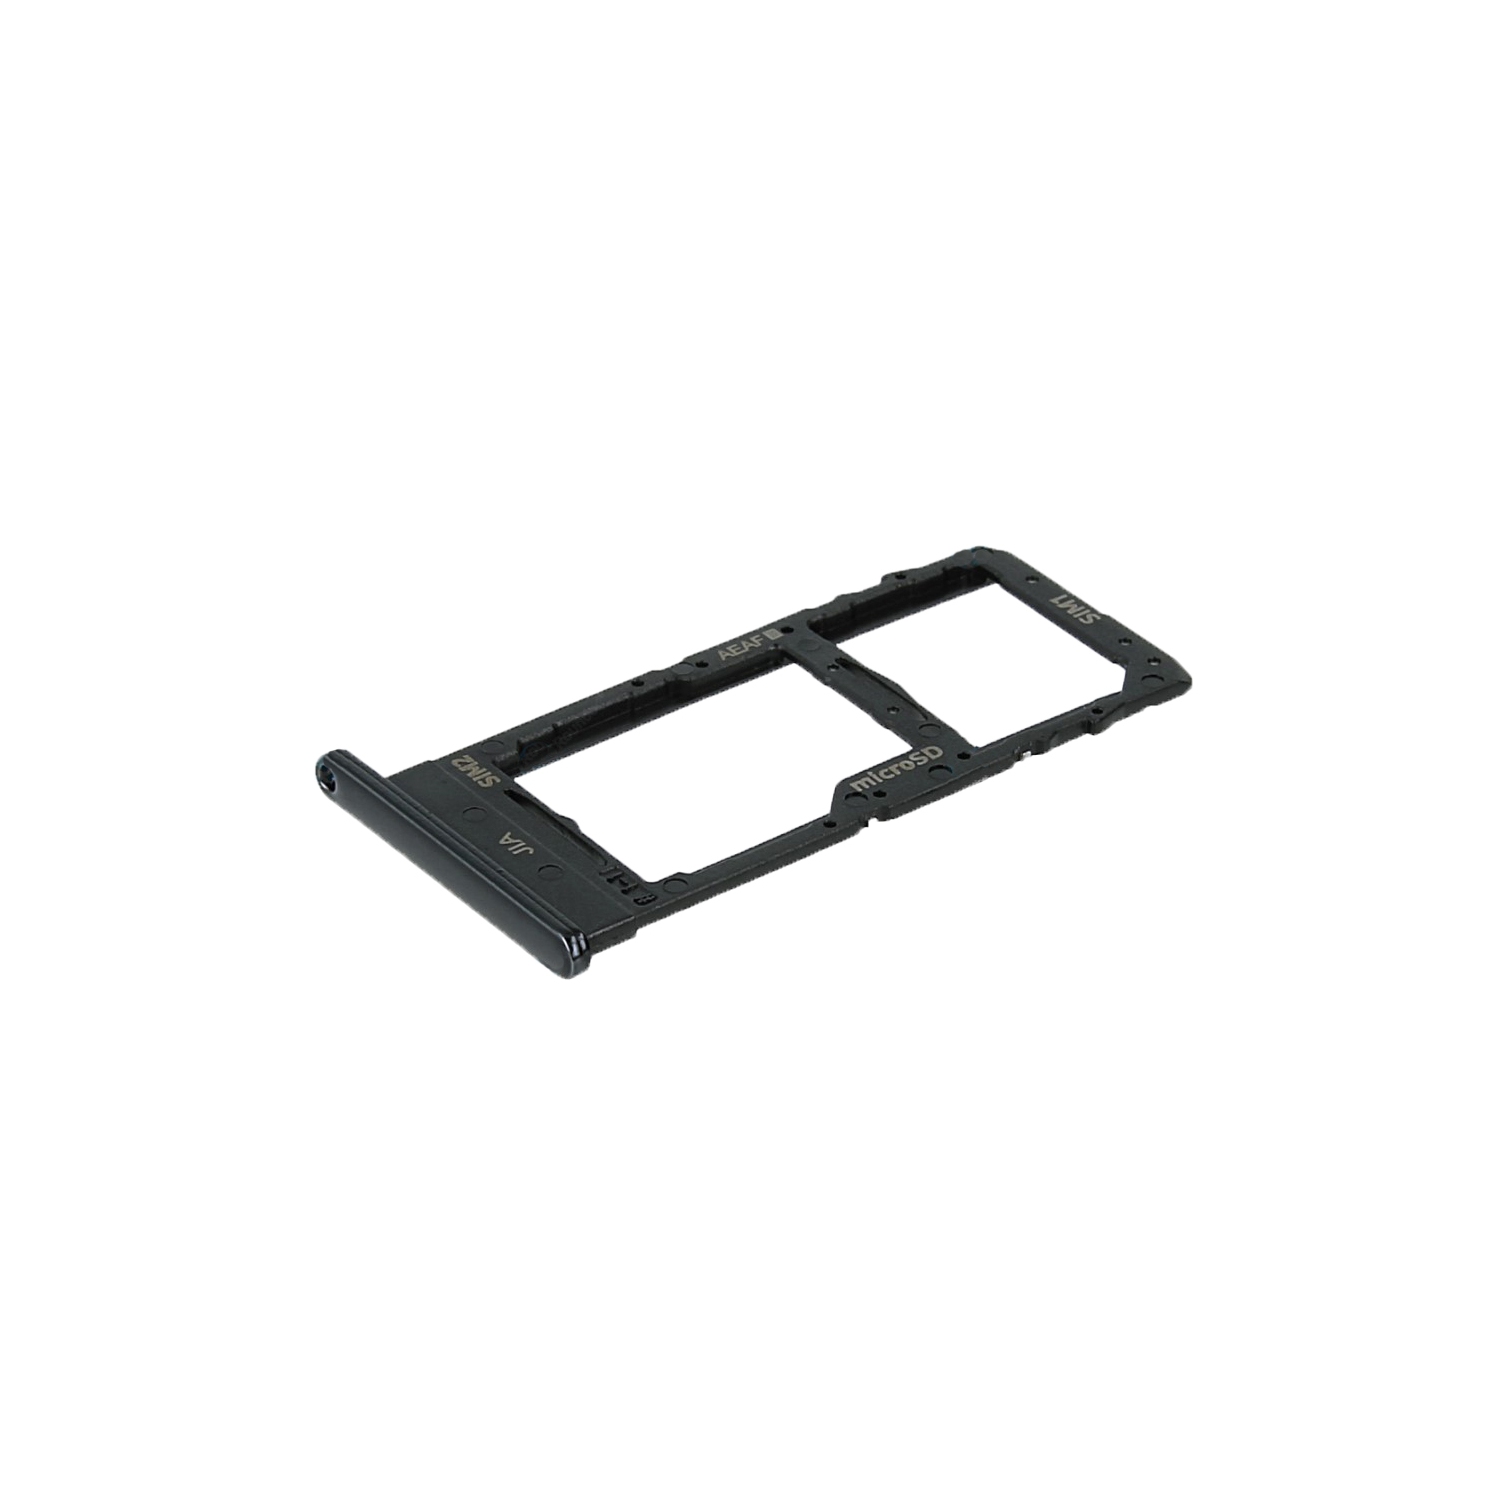 Replacement Single Sim Card Tray + Micro SD Card Tray For Samsung Galaxy A51 (SM-A515W / 2019) - Black